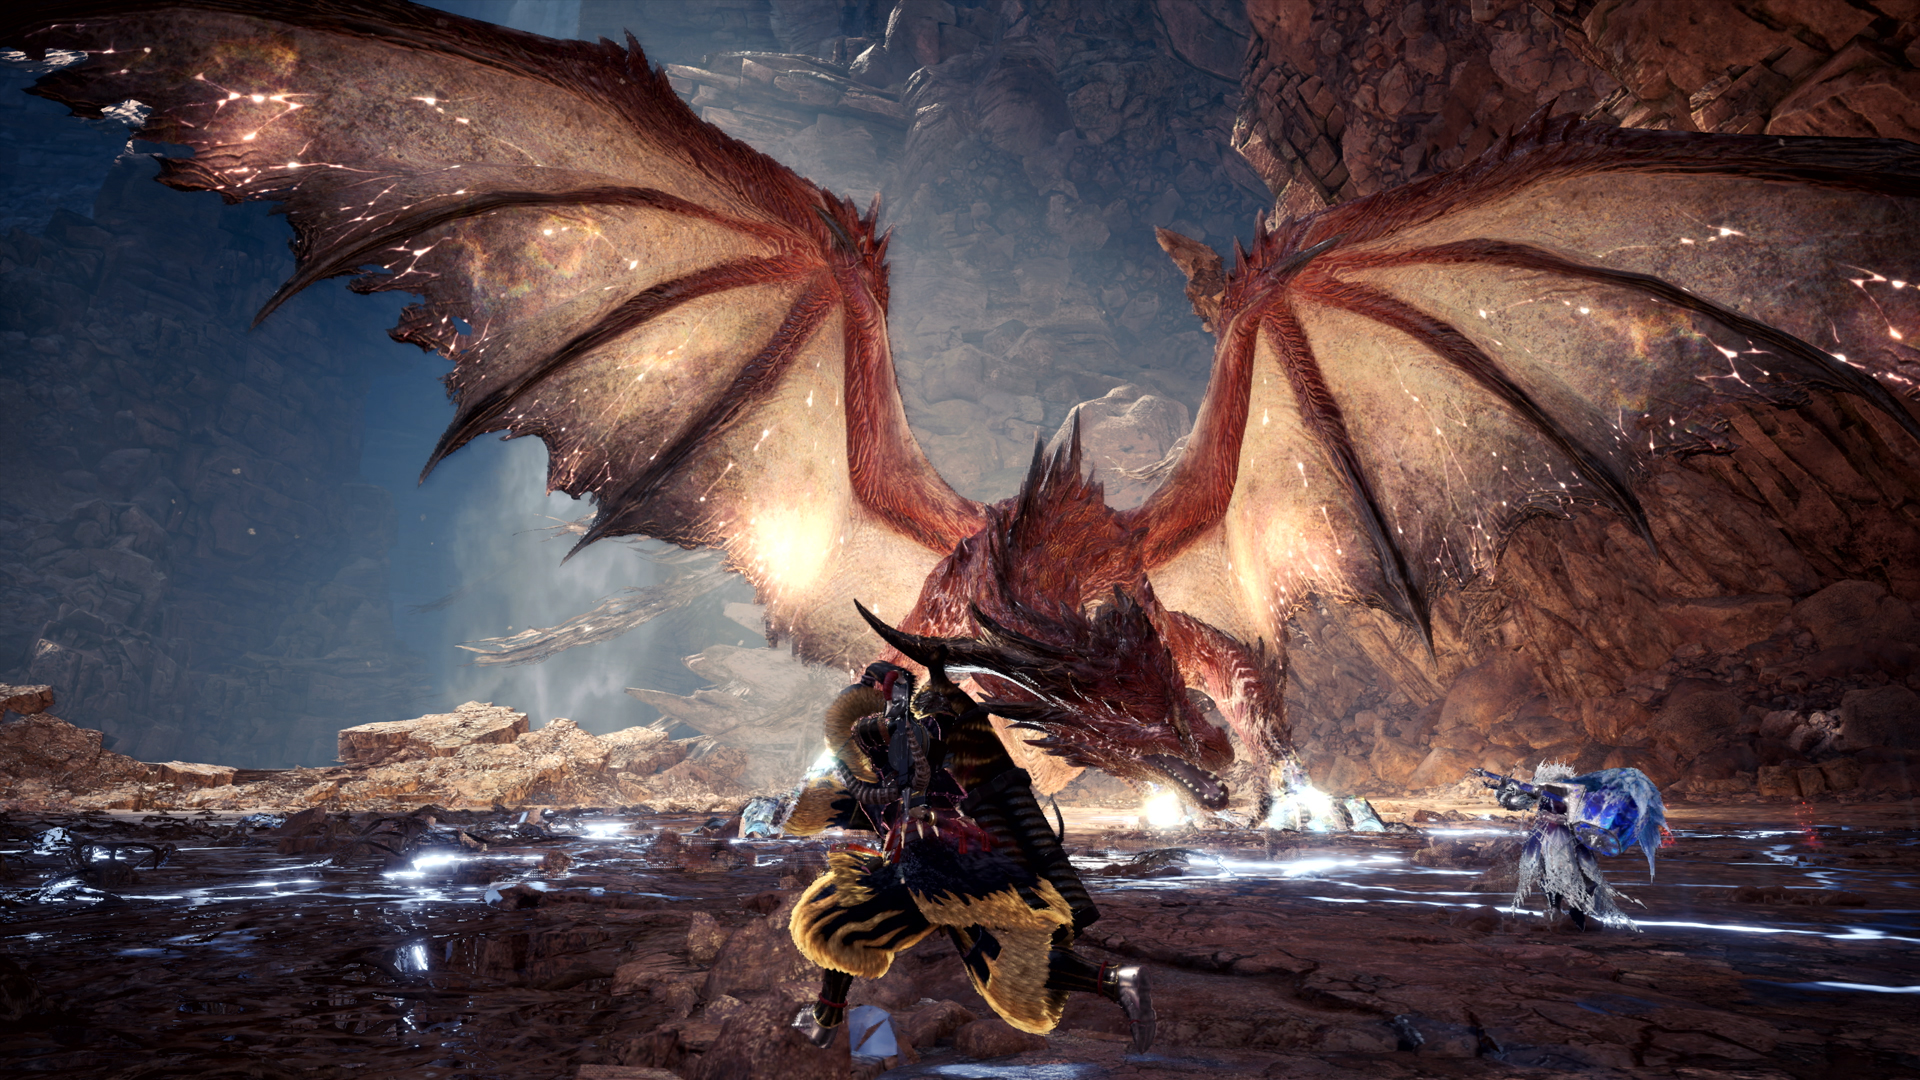 Monster Hunter 在twitter 上 The Cataclysmic Safi Jiiva Siege Is Live In Iceborne For One More Day Then The Red Dragon Makes Way For The Kulve Taroth Siege And Master Rank Event Quest